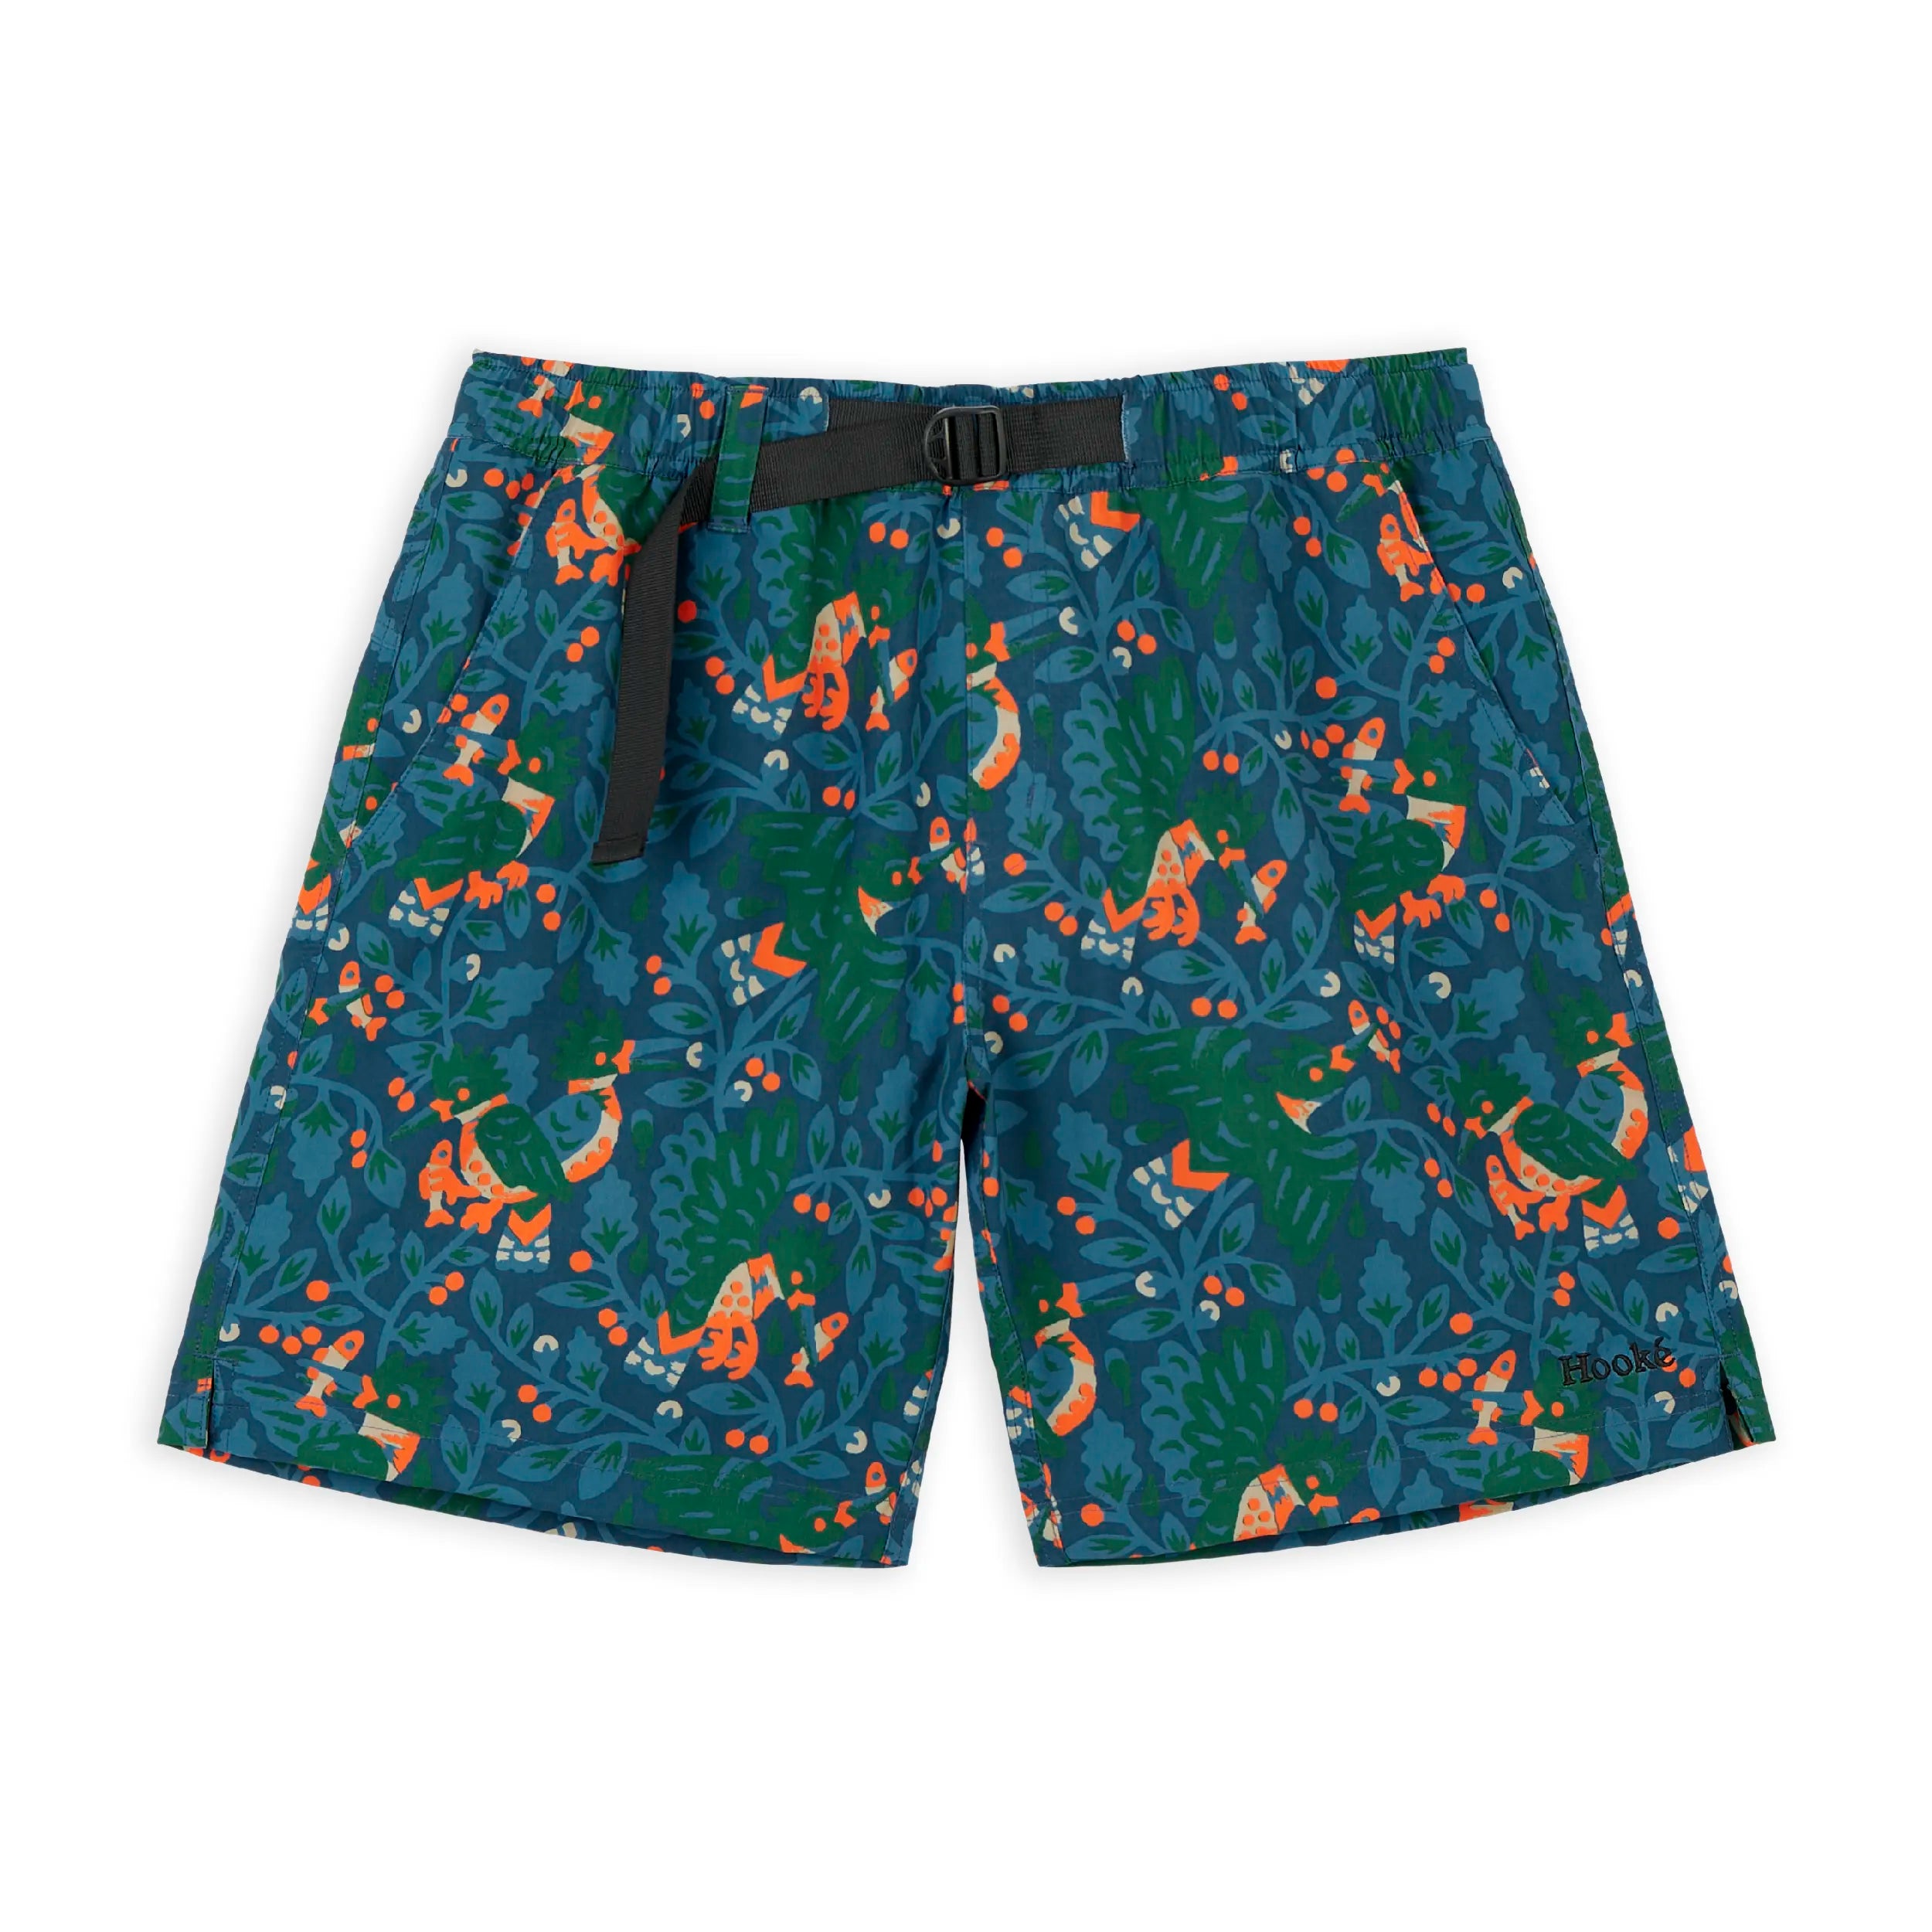 Apparel By Home Run: Introducing The HR® Original Fishing Shorts